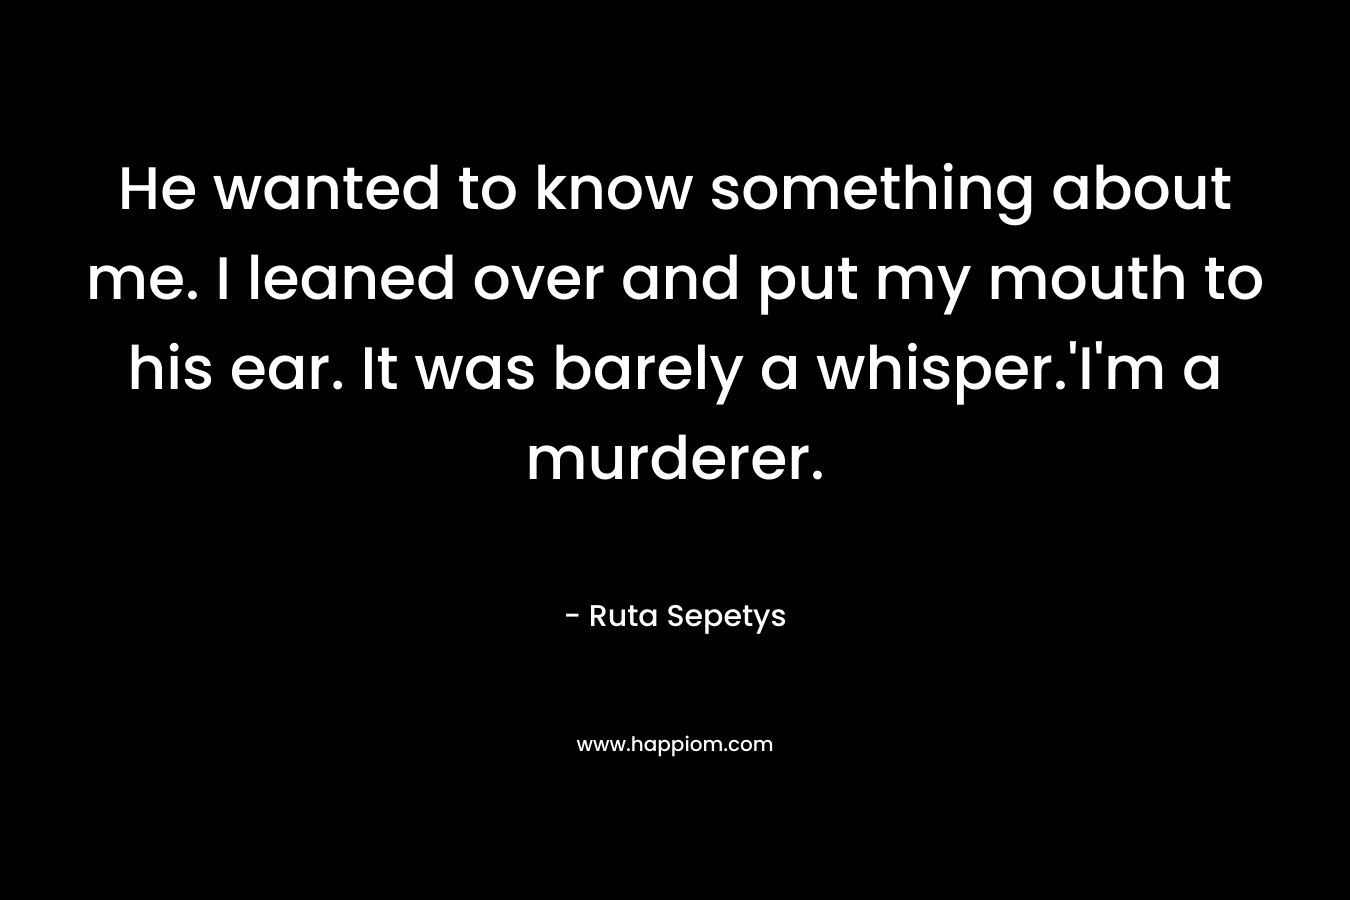 He wanted to know something about me. I leaned over and put my mouth to his ear. It was barely a whisper.’I’m a murderer. – Ruta Sepetys